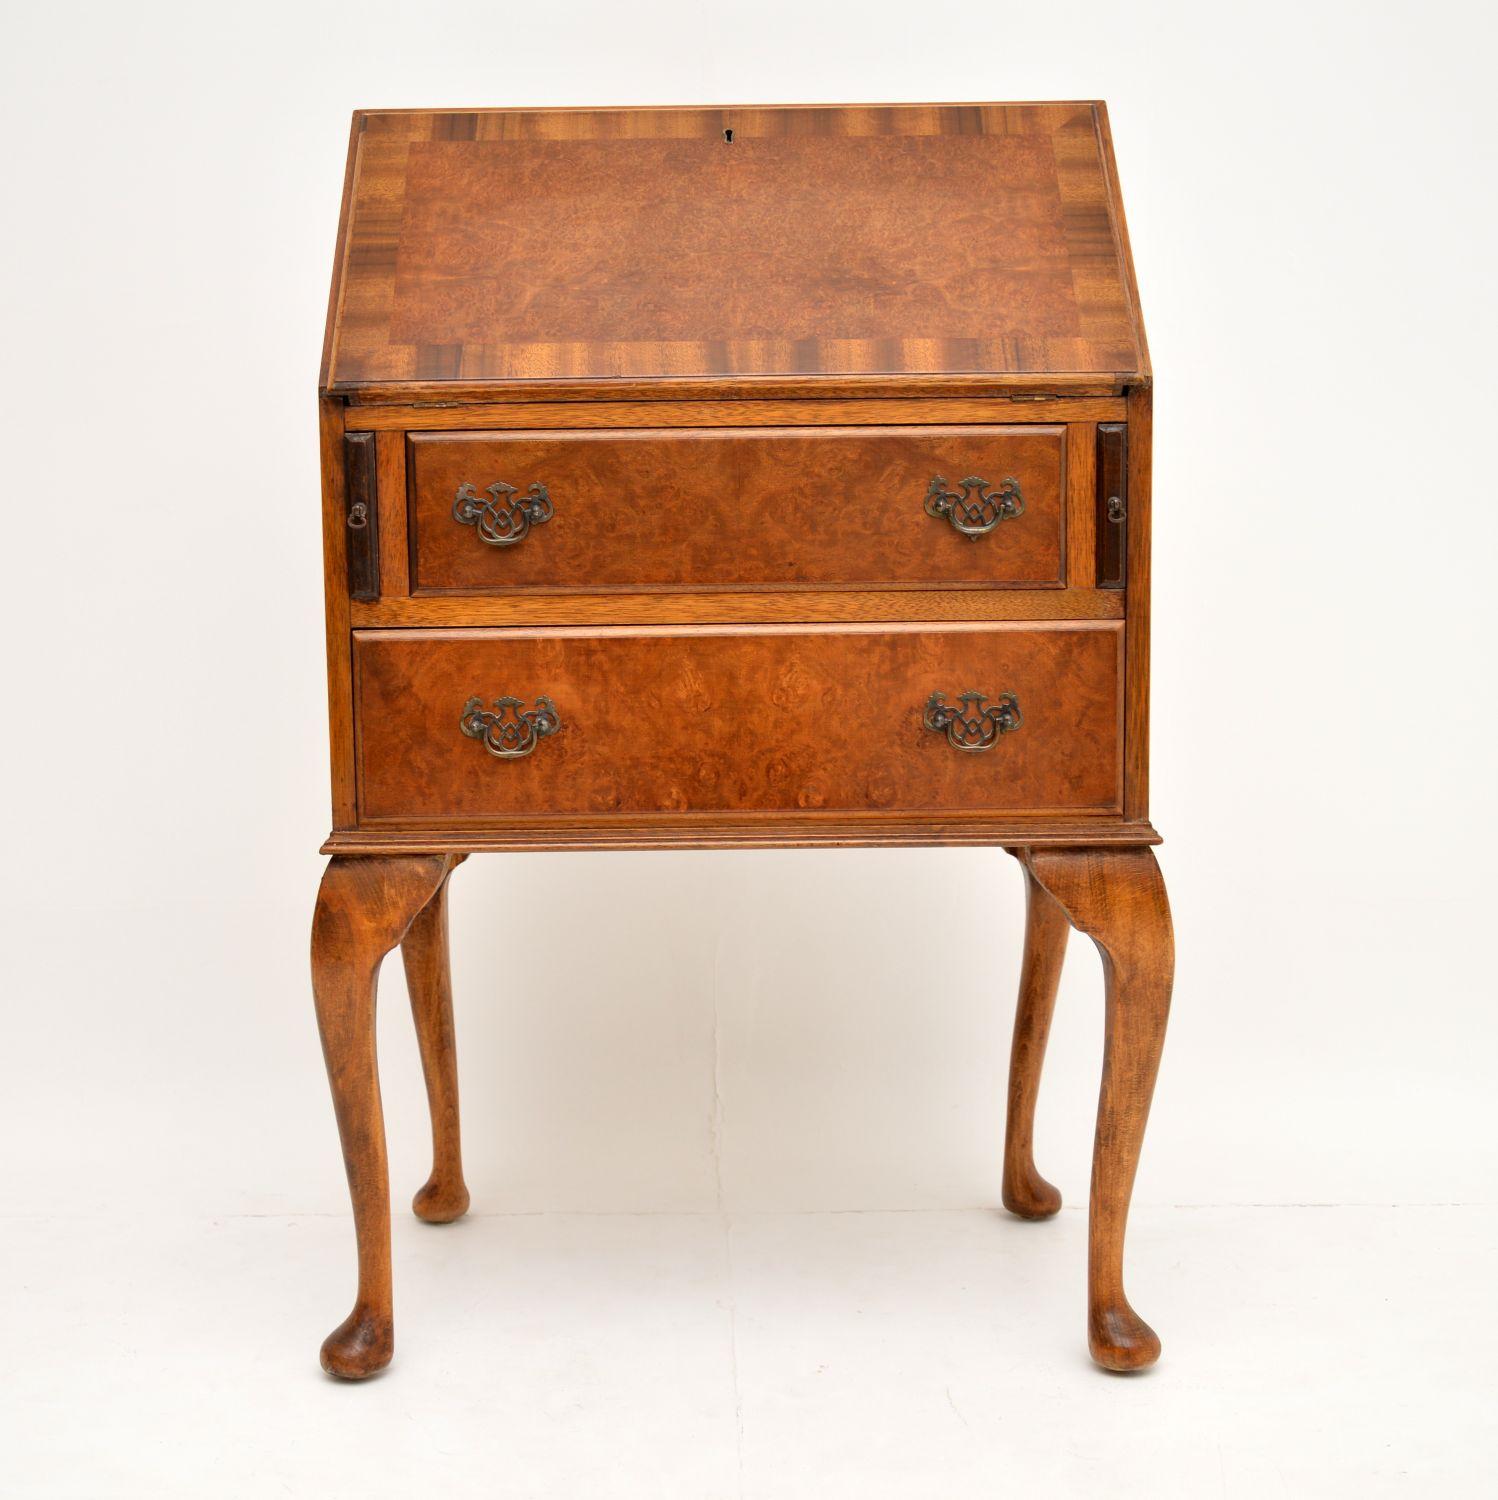 Antique Queen Anne style walnut bureau in excellent condition, with a nice warm color, plenty of character and dating to around the 1930s period.

It has a burr walnut top, slope & drawers. The drawers have original brass handles and the slope is